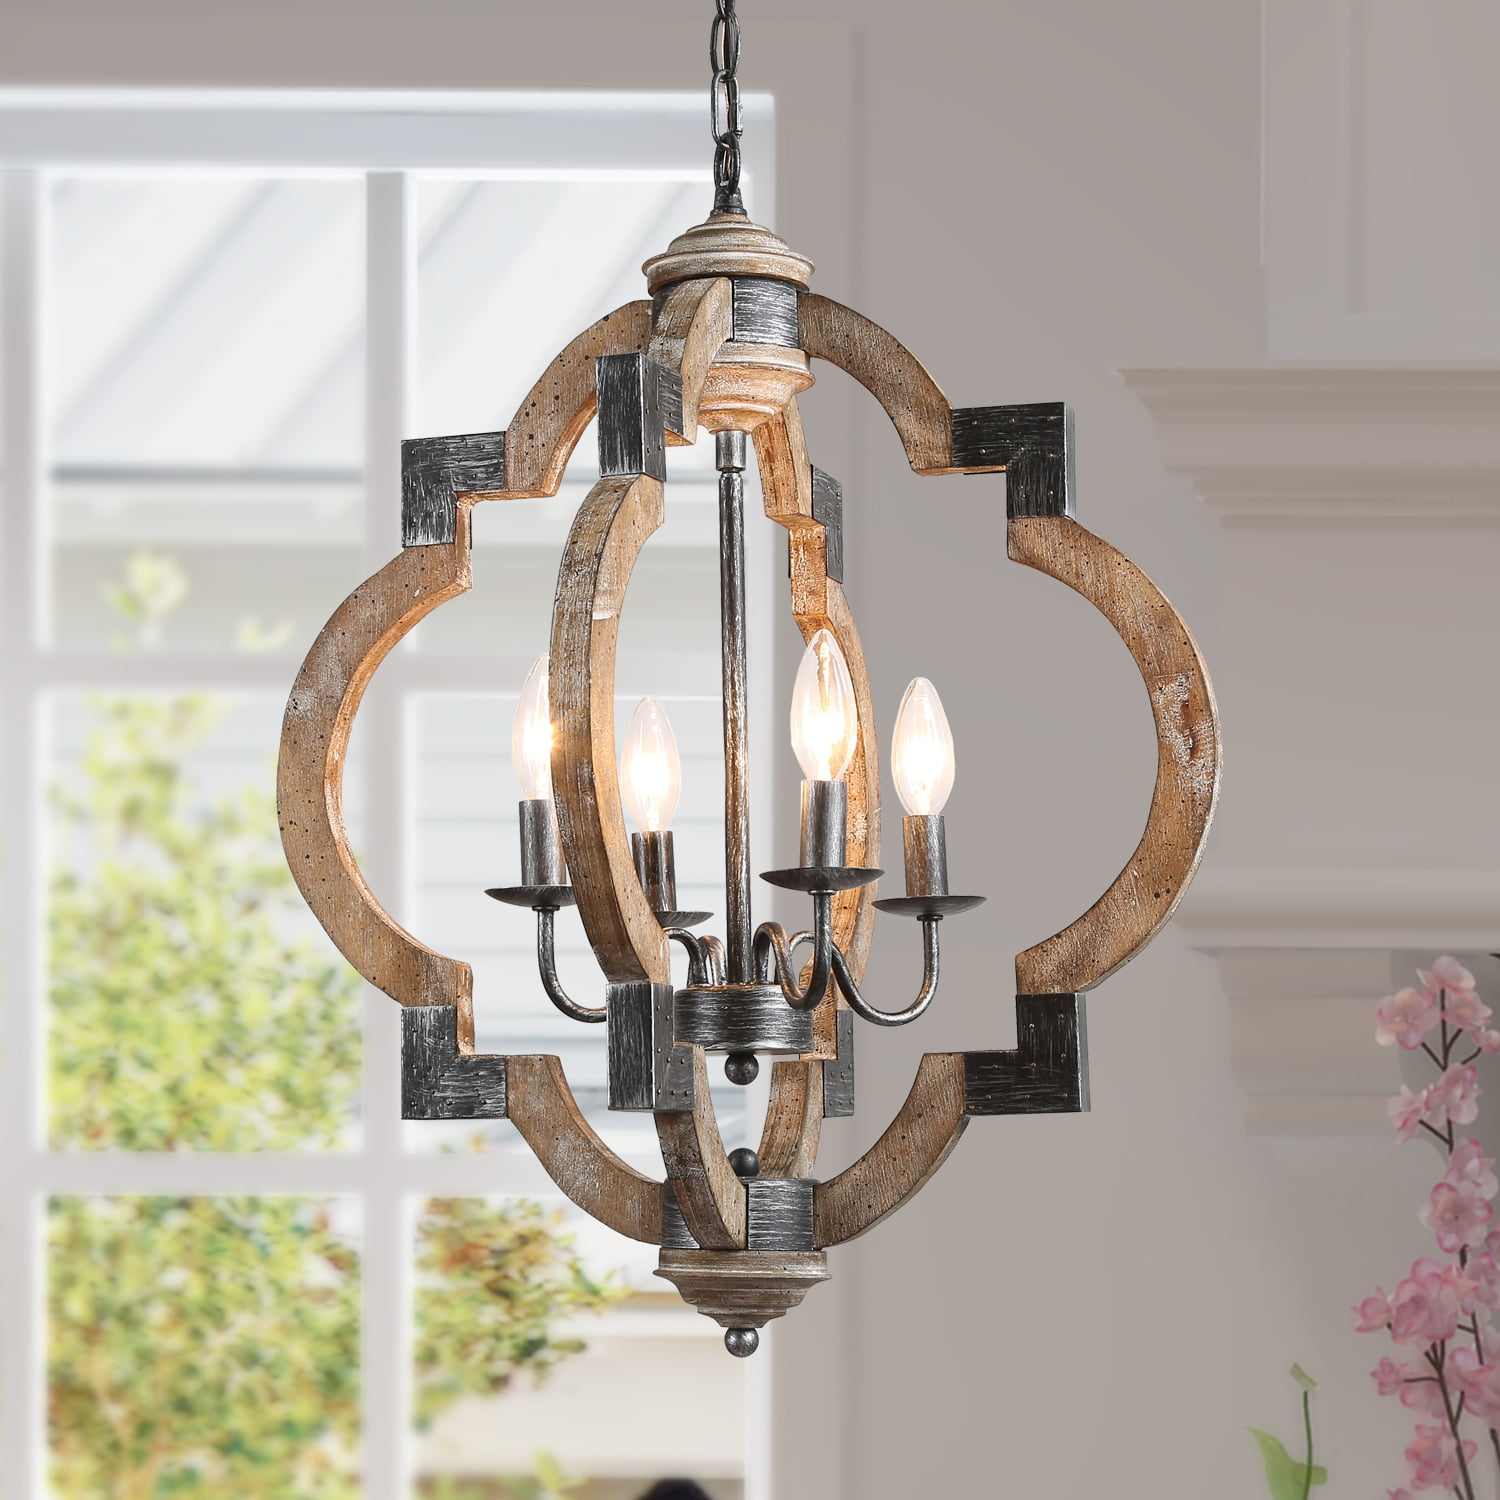 Farmhouse Distressed Wooden Chandelier light with 4 lights ...